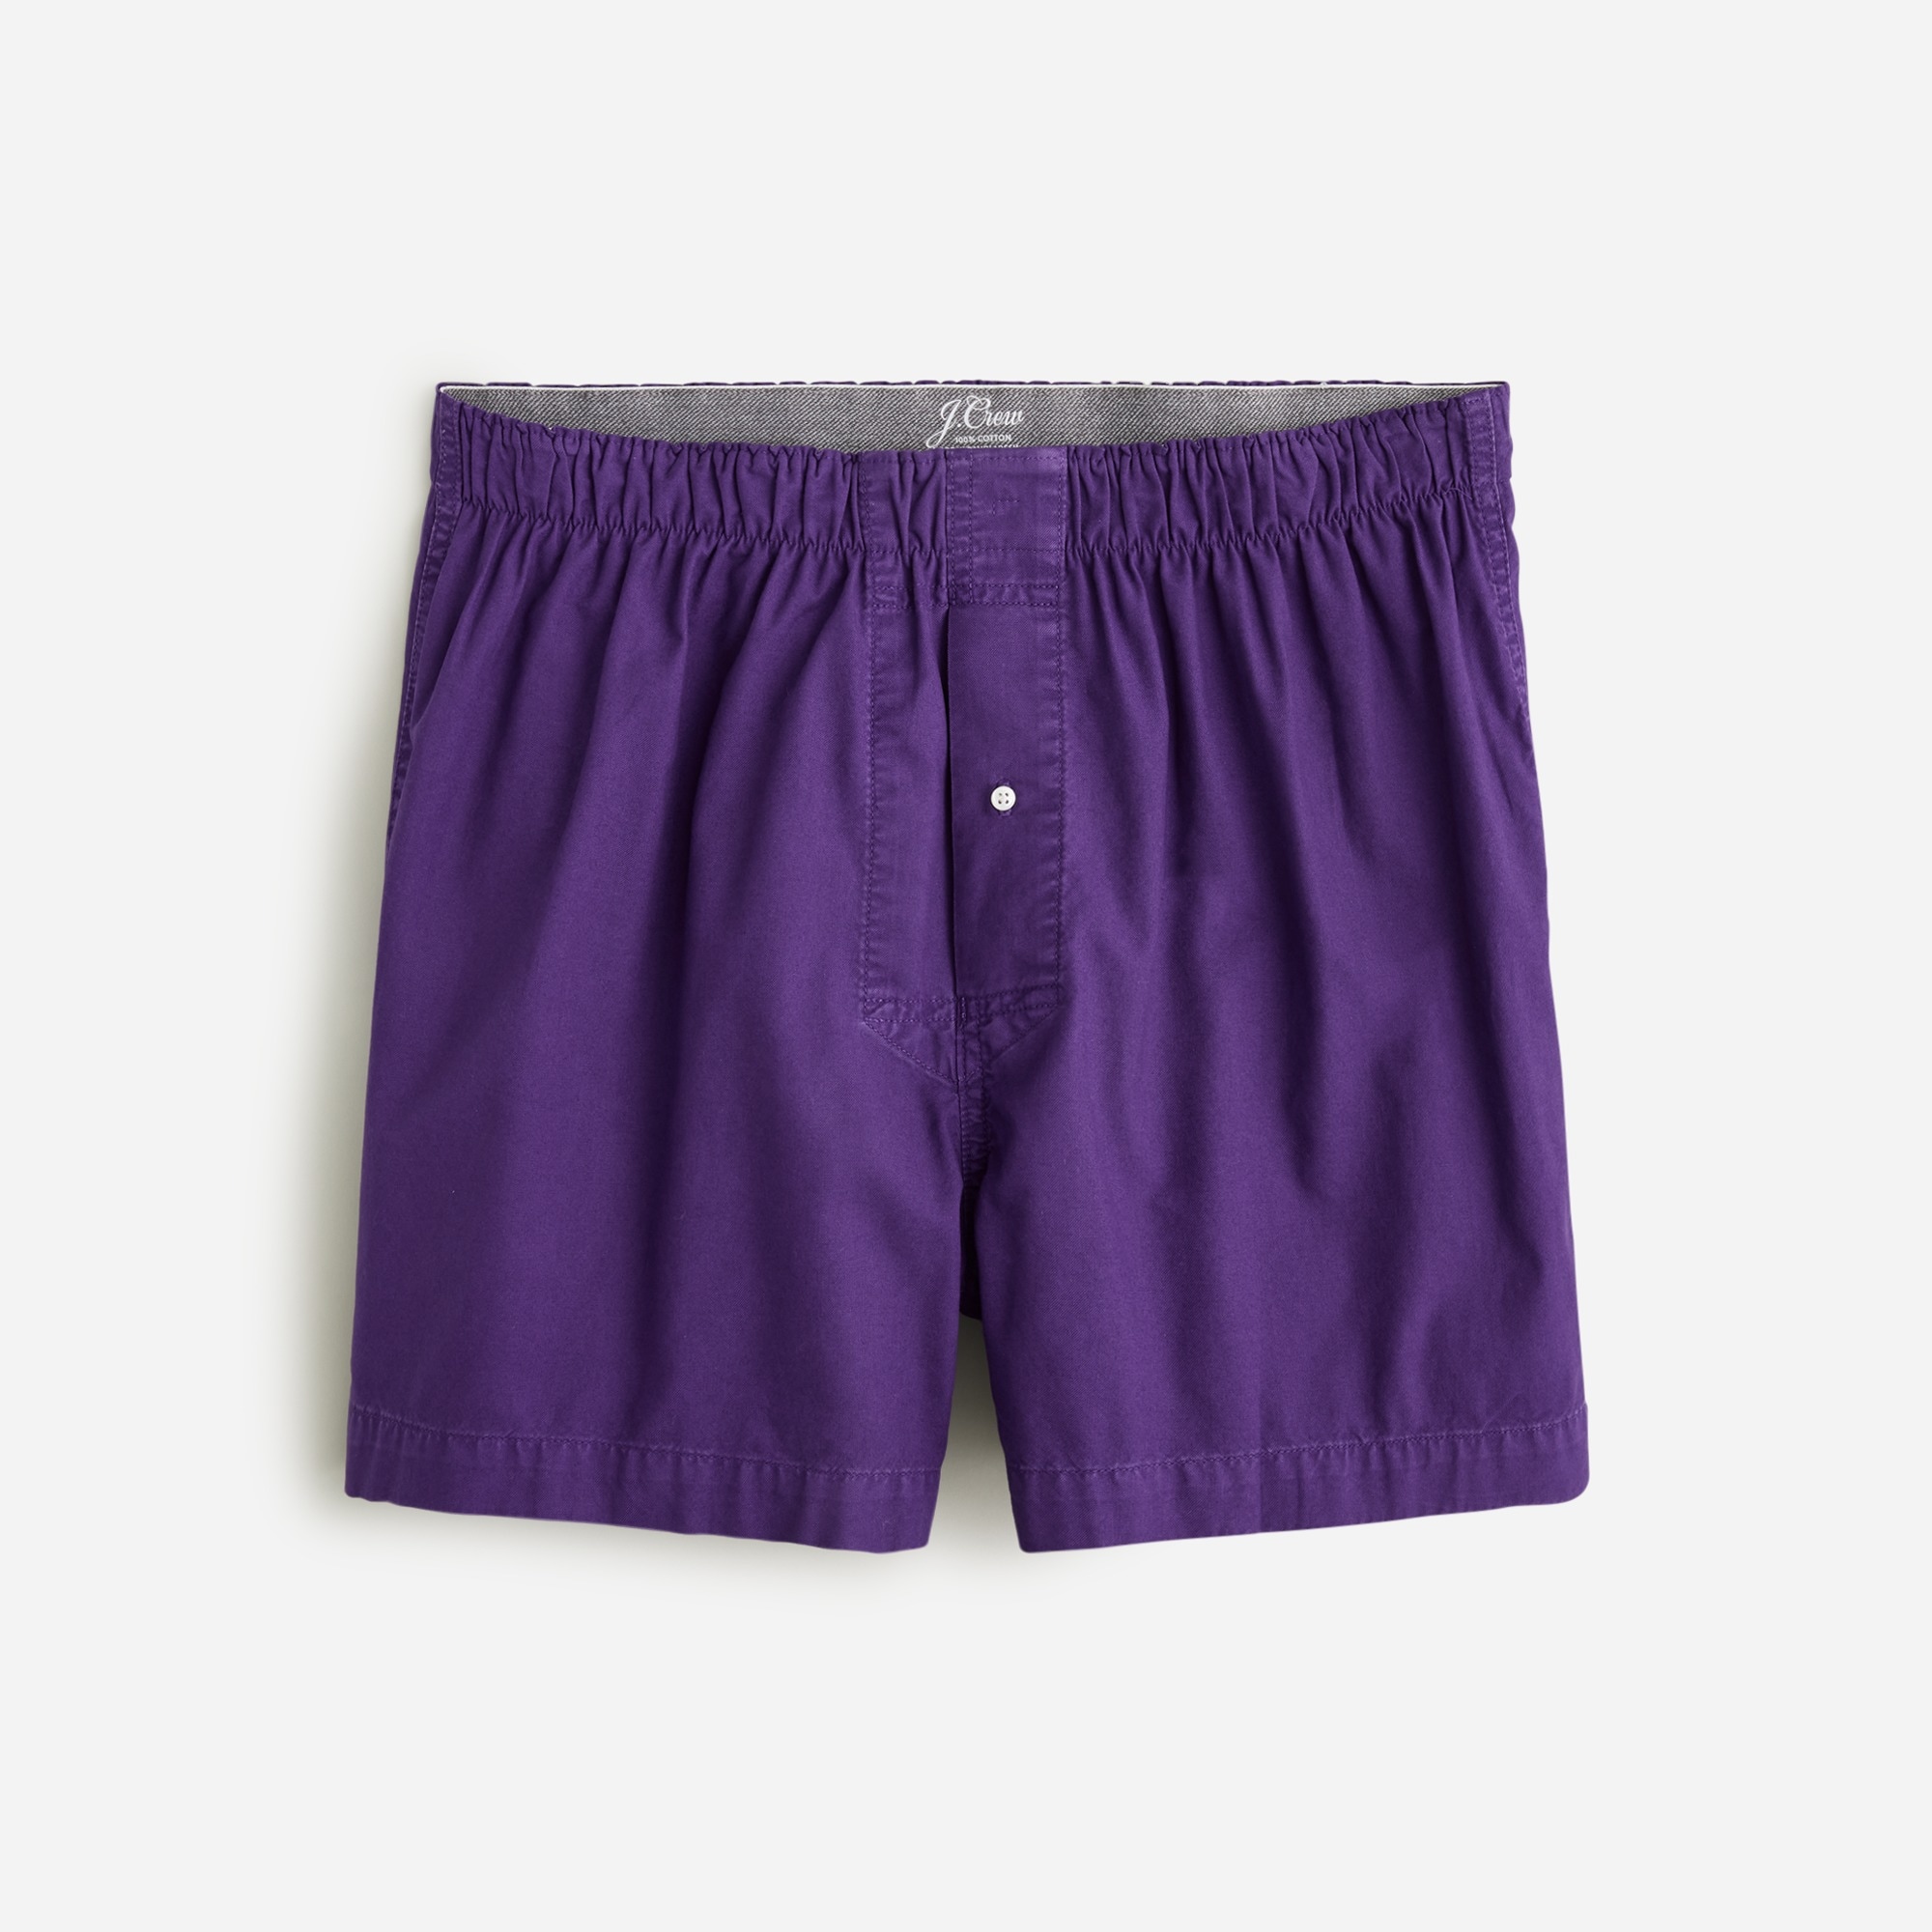  Boxer shorts in garment-dyed Broken-in organic cotton oxford